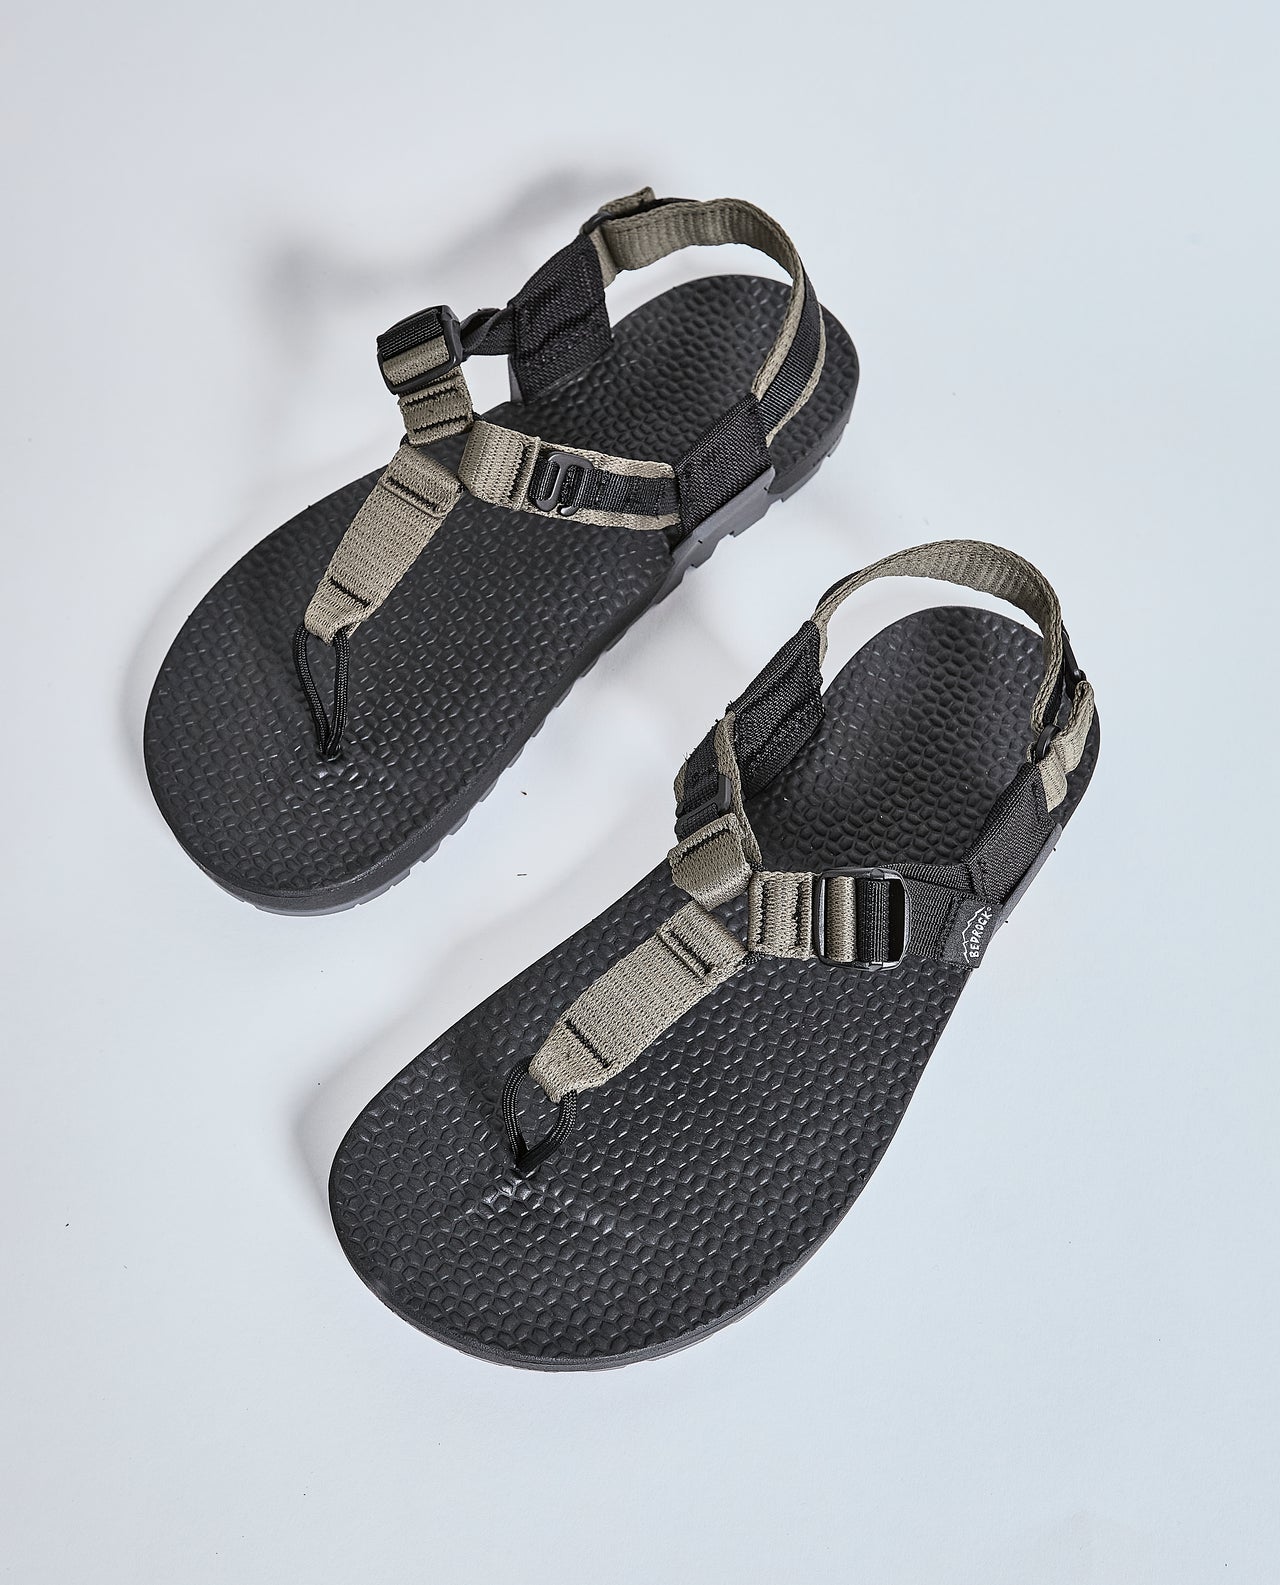 Cairn Evo 3D PRO Sandal in Charcoal